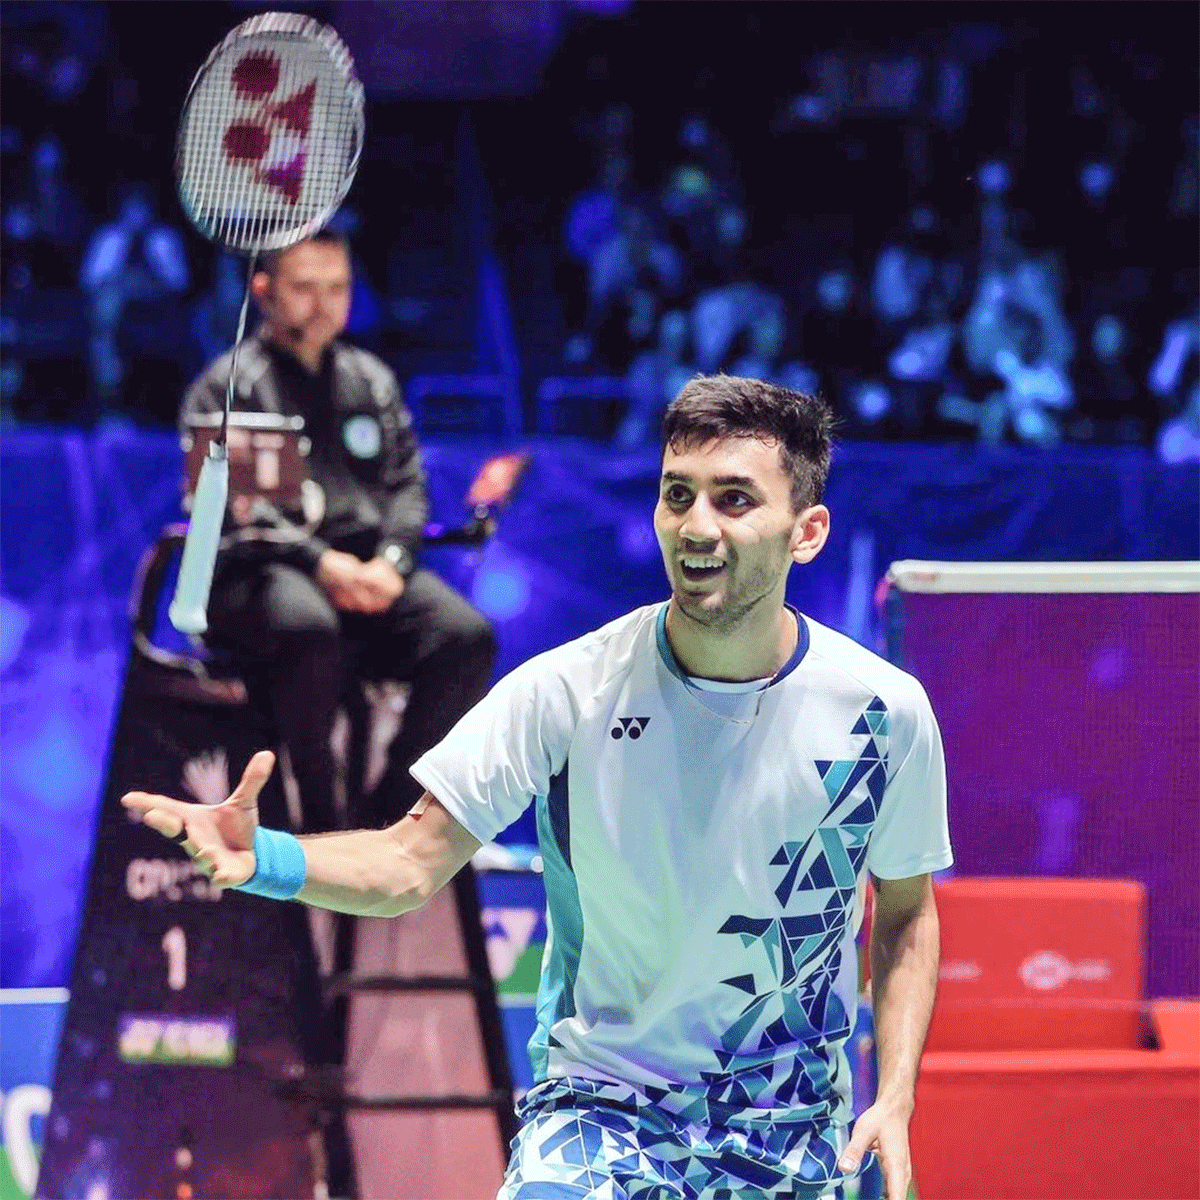 Currently No. 6 in the world, Lakshya Sen was on Wednesday honoured with the Arjuna Award at the Rashtrapati Bhavan. He won a World Championship bronze after going down to compatriot Kidambi Srikanth in 2021.